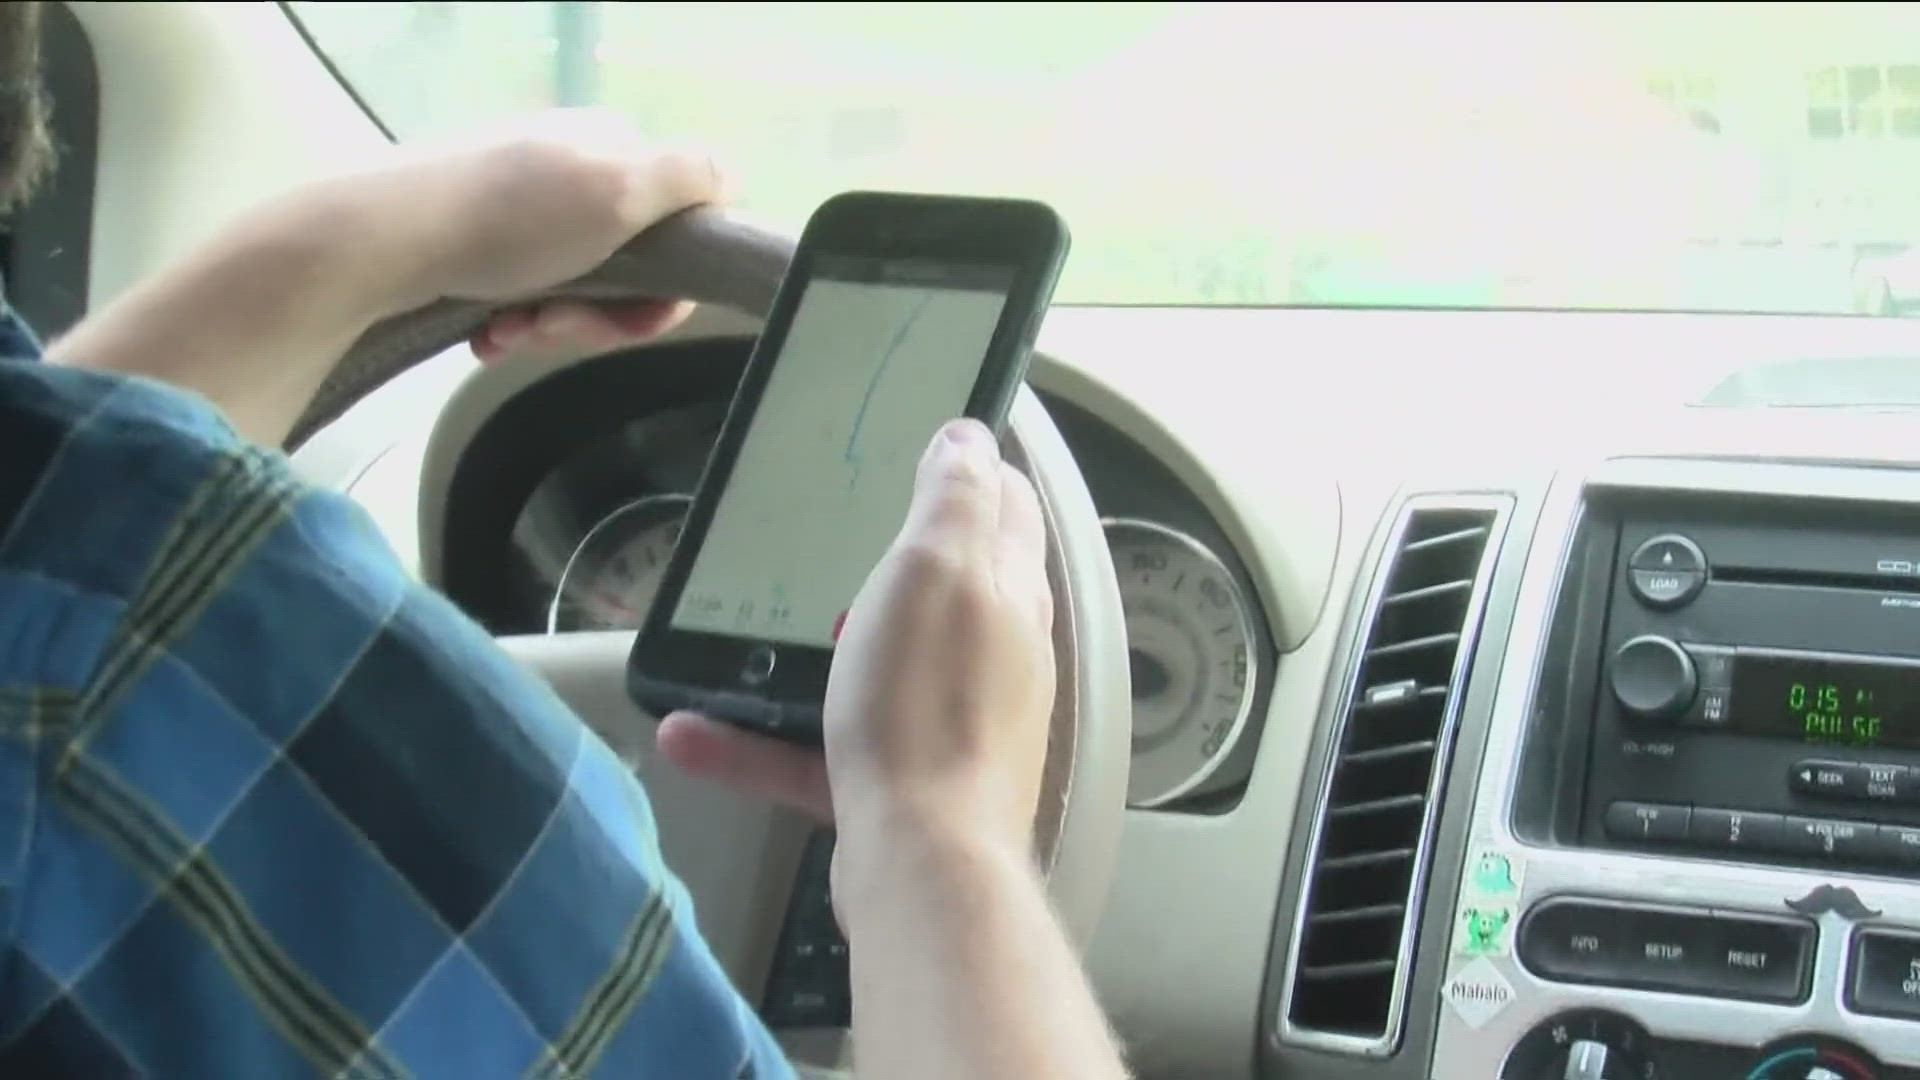 If you're caught by law enforcement on your phone while driving, you can be pulled over and ticketed.